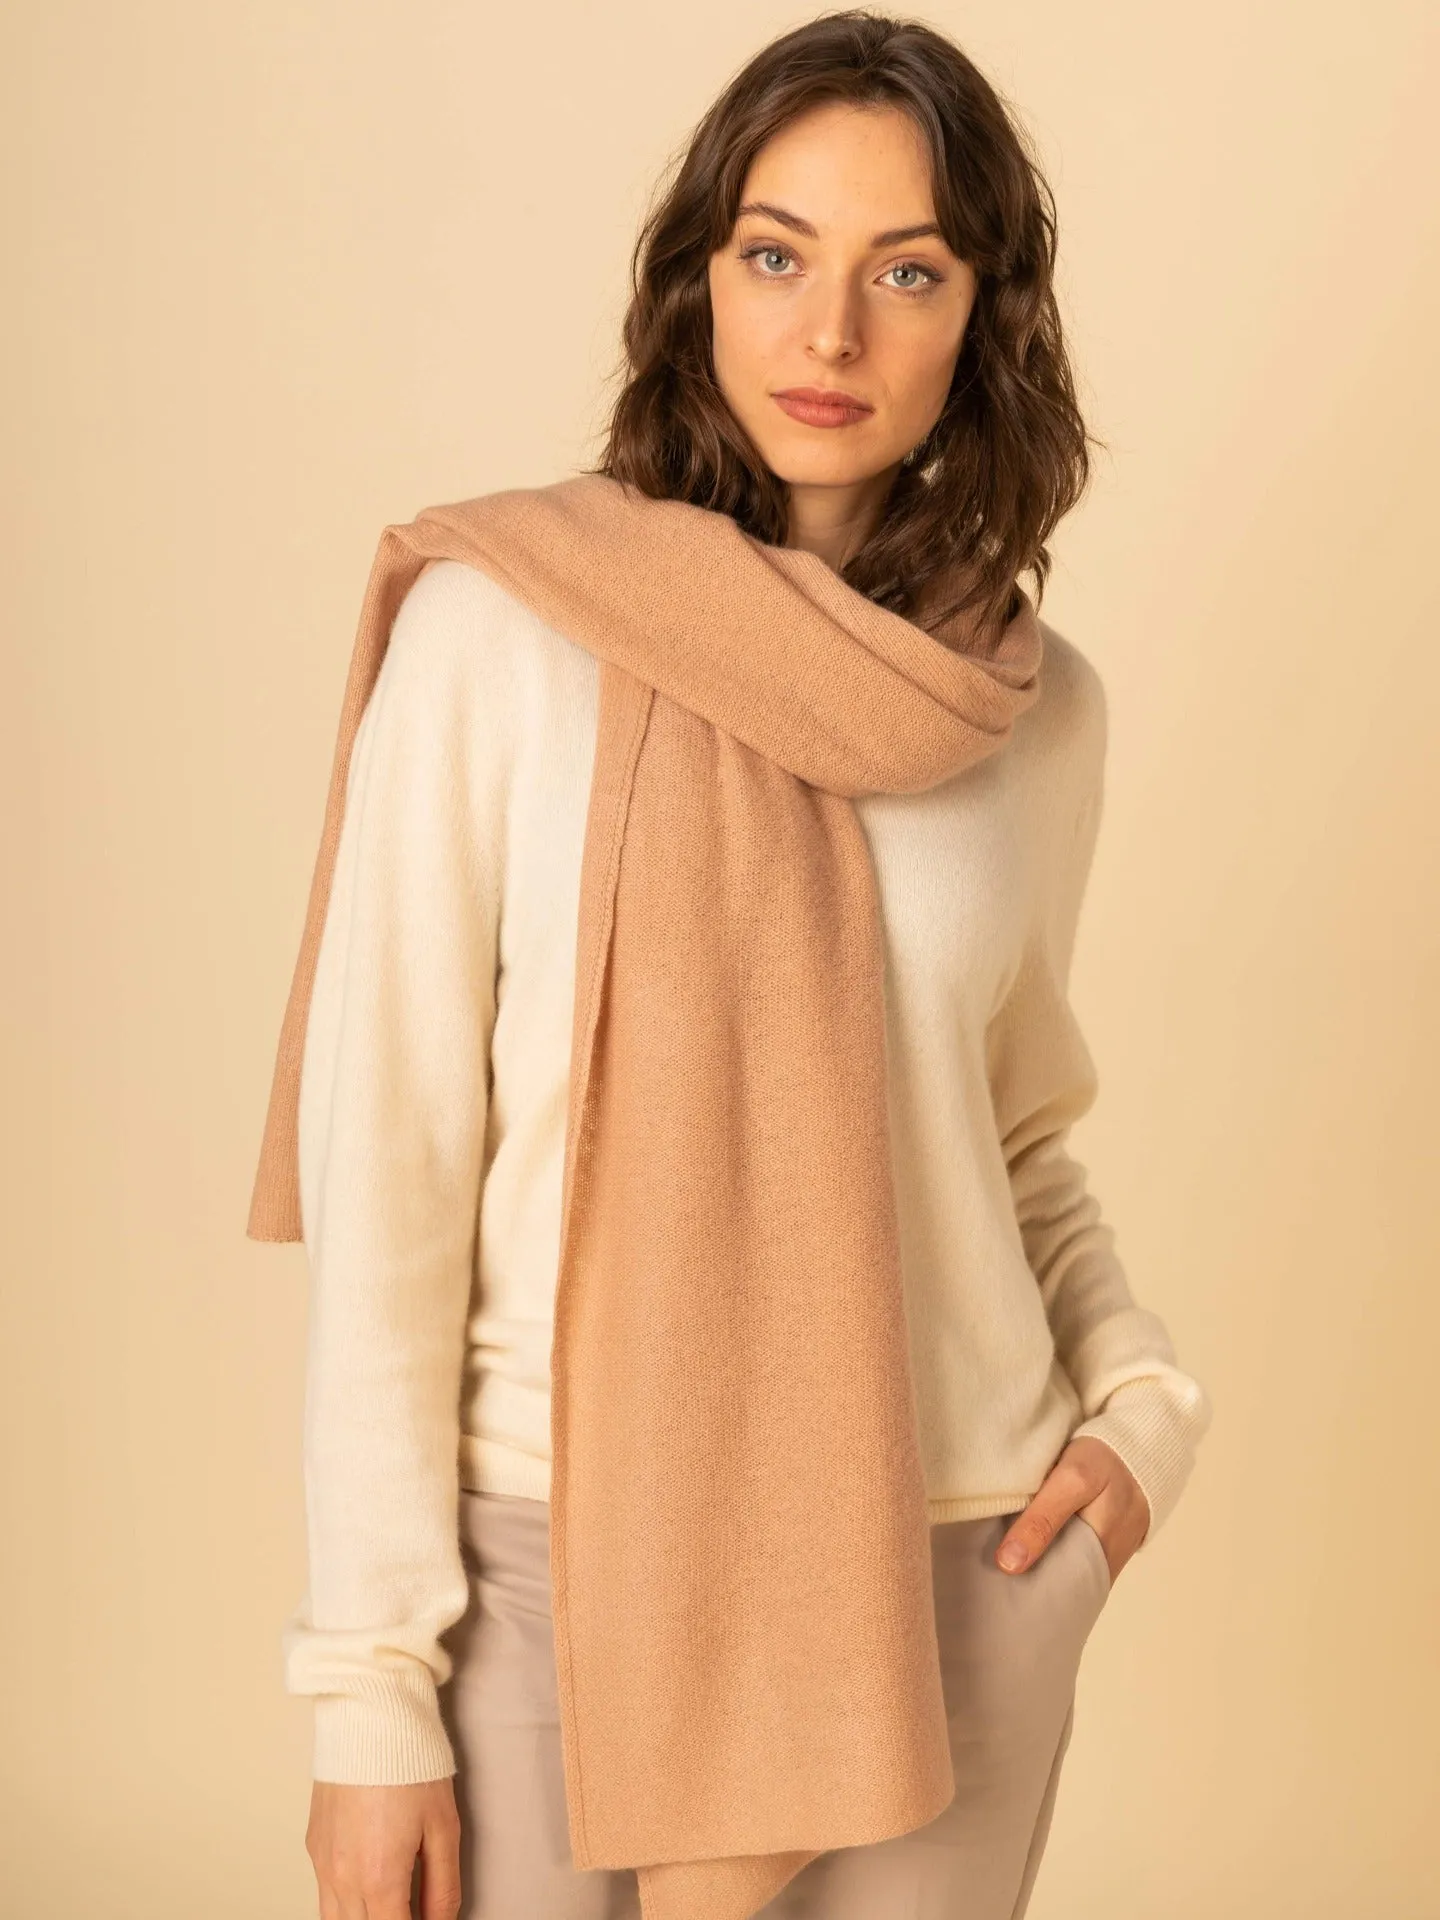 Women's Cashmere Knitted Scarf Toasted Almond - Gobi Cashmere